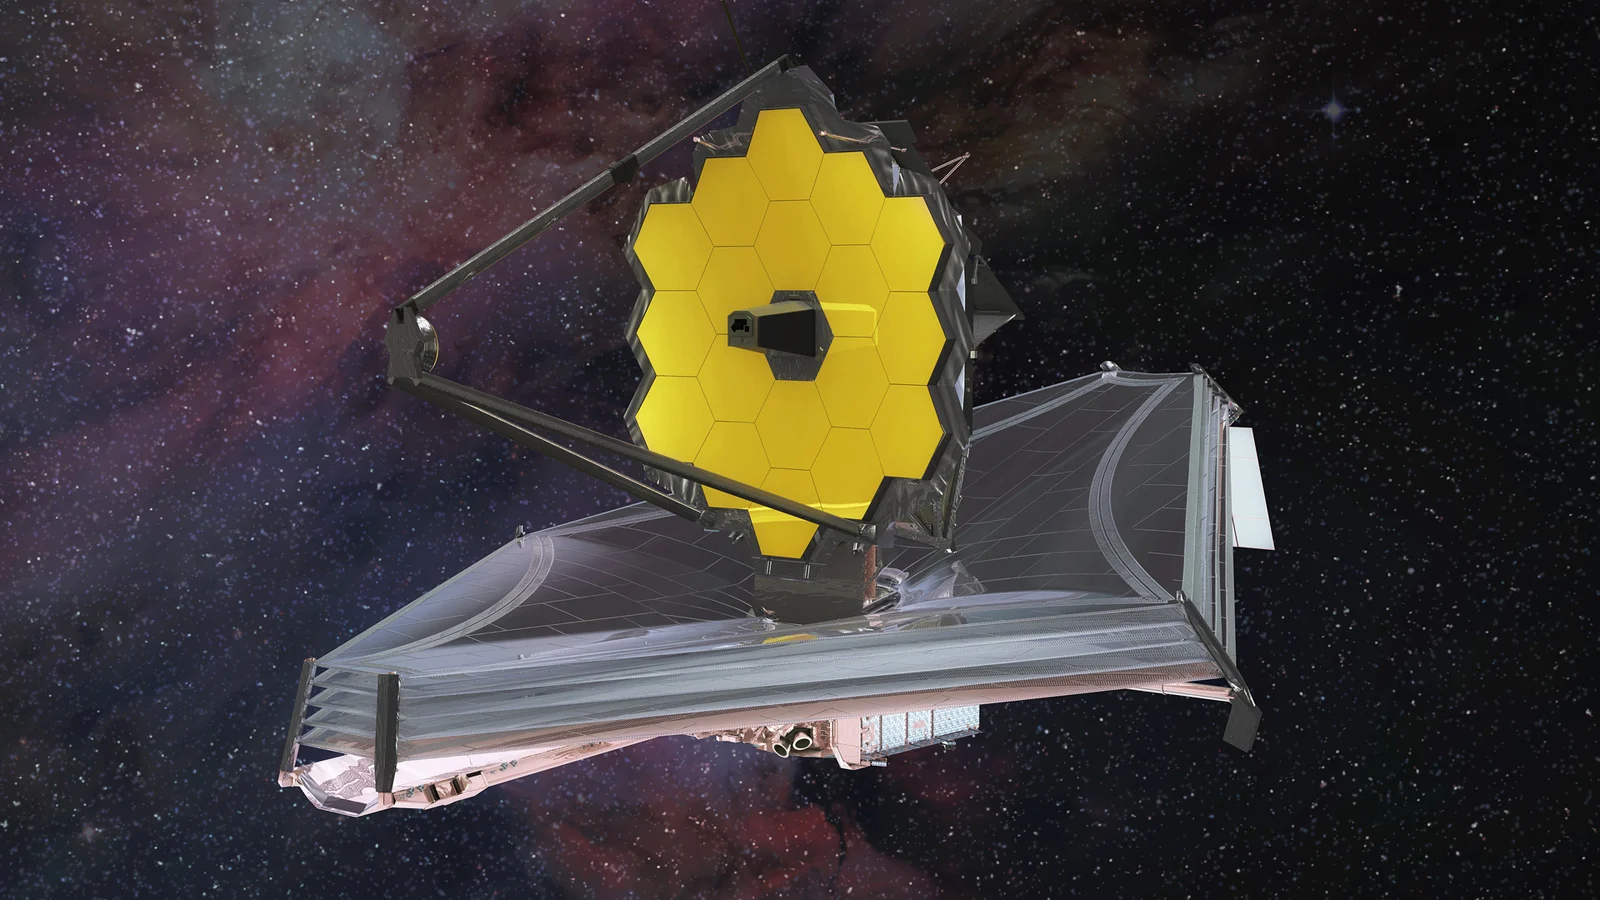 James Webb Space Telescope lifts off in spectacular Christmas morning launch